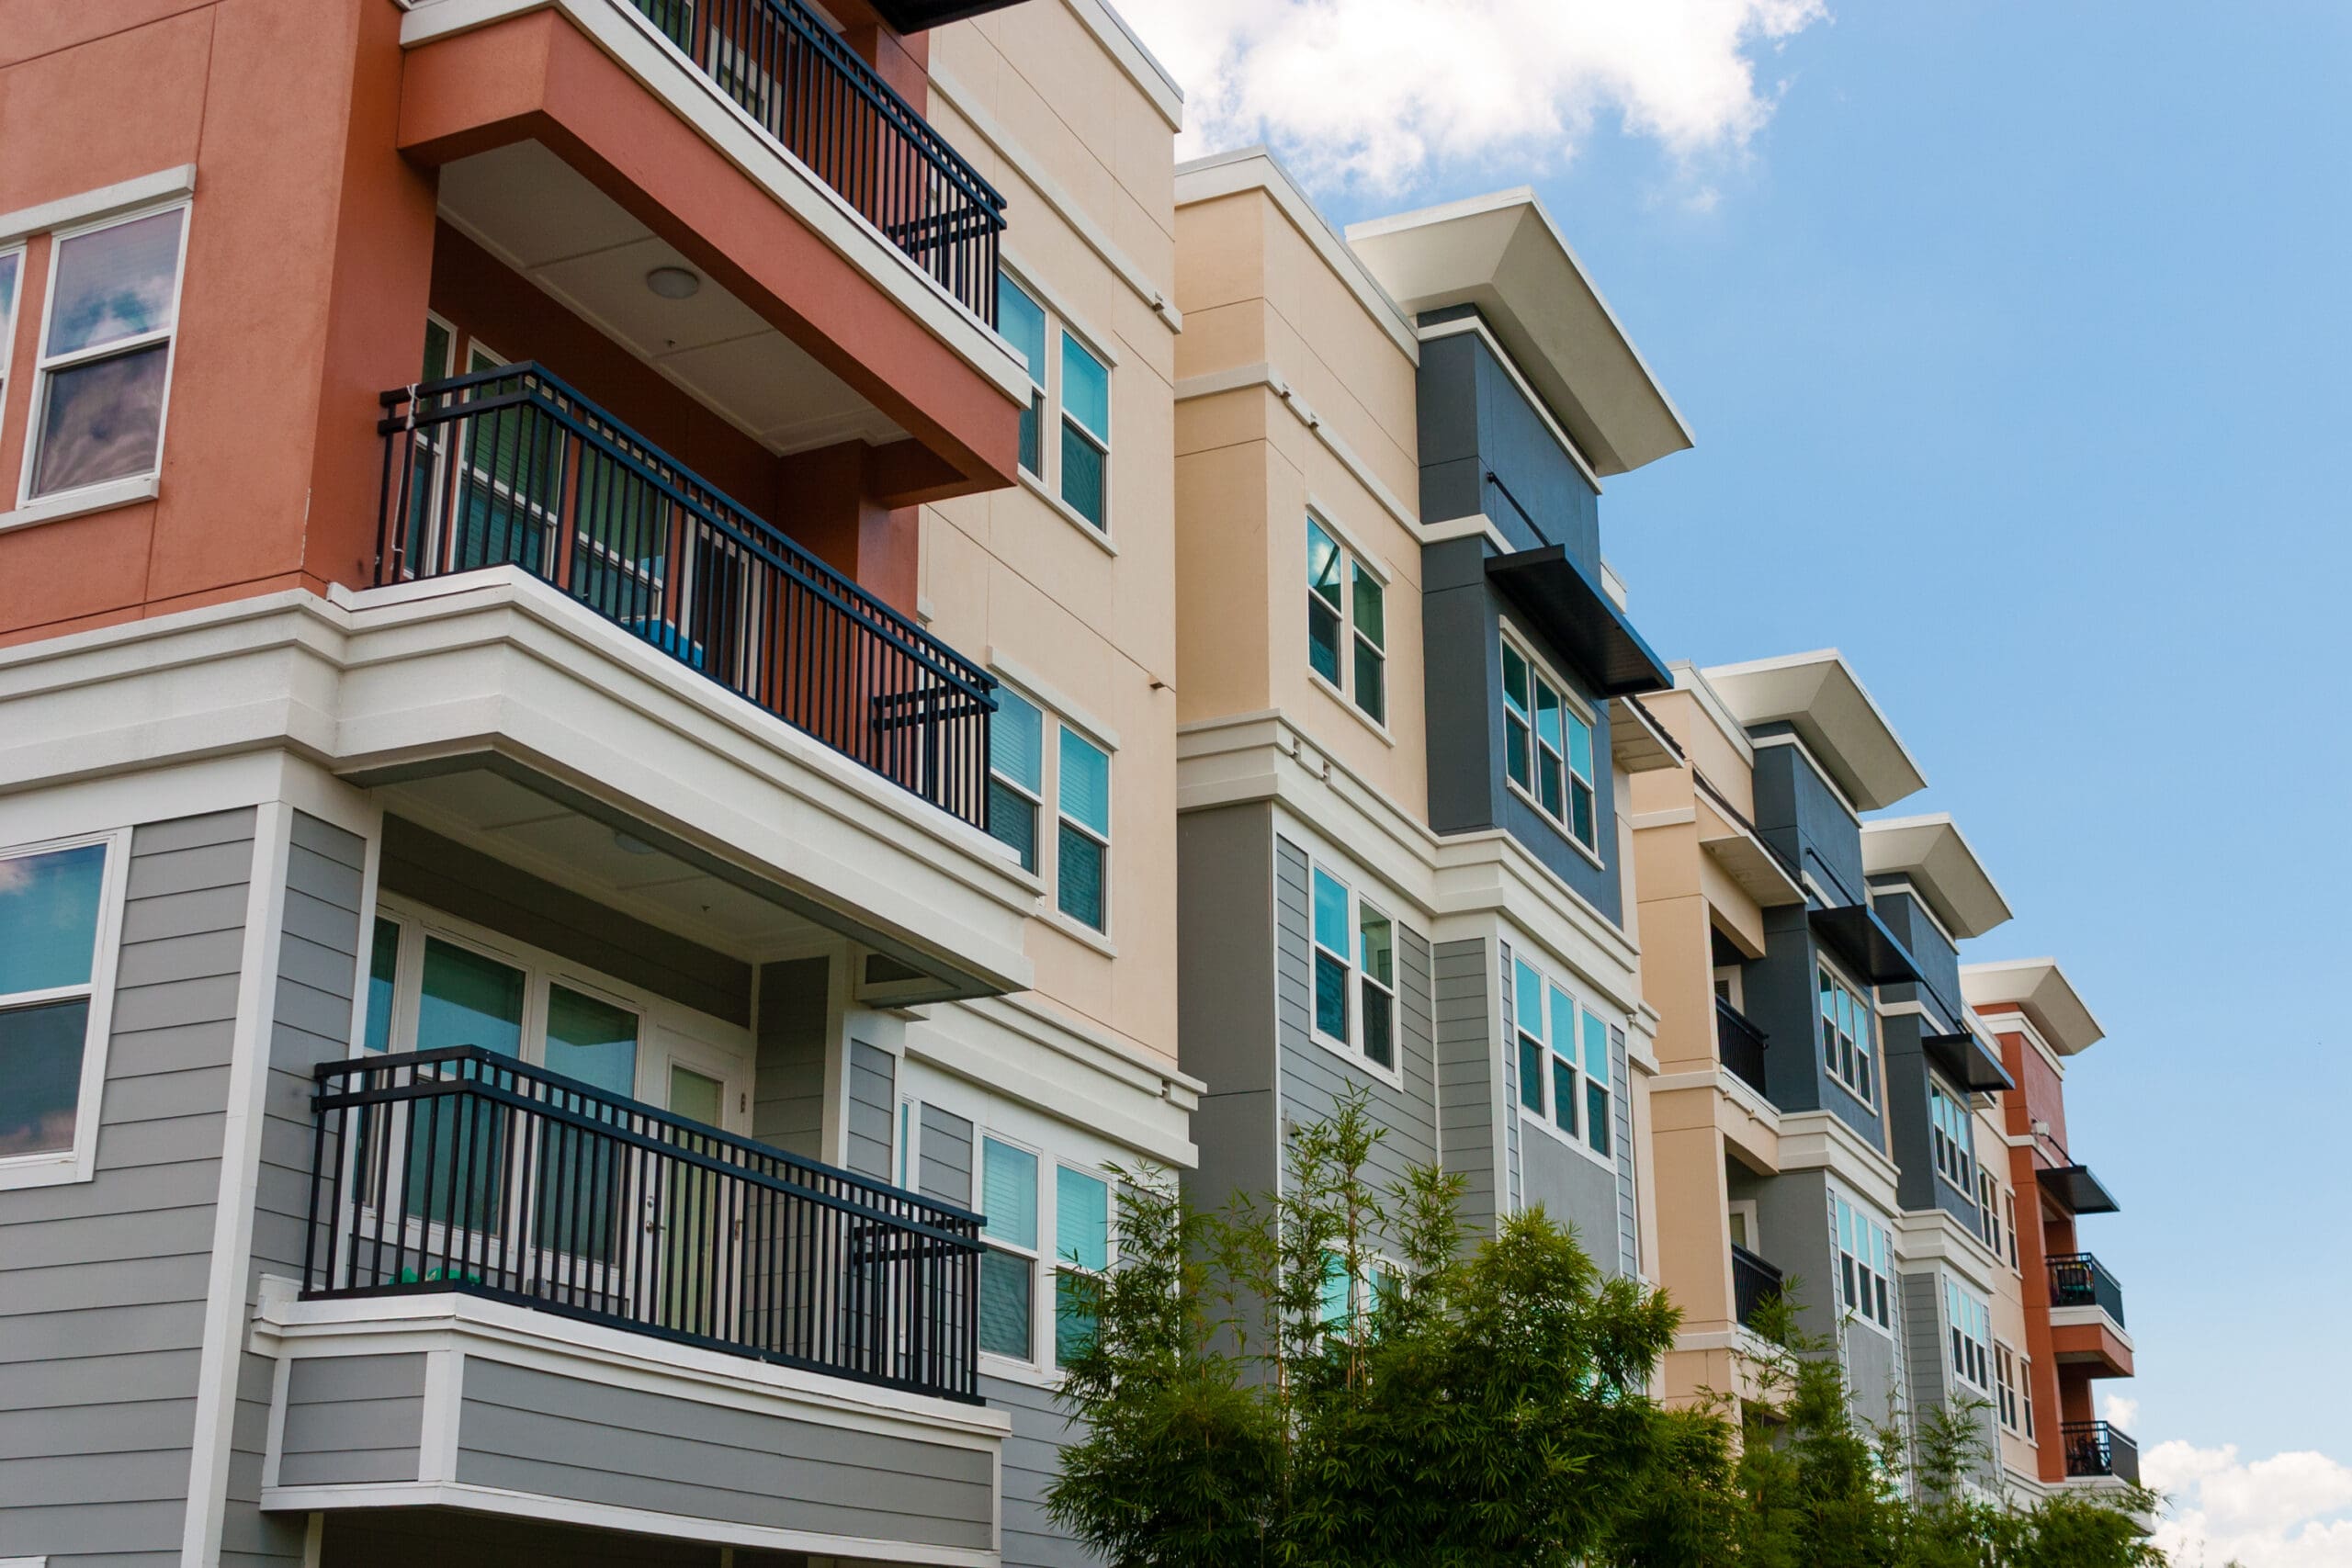 Mitigating Risk In Multifamily Investments: A Few Things To Consider